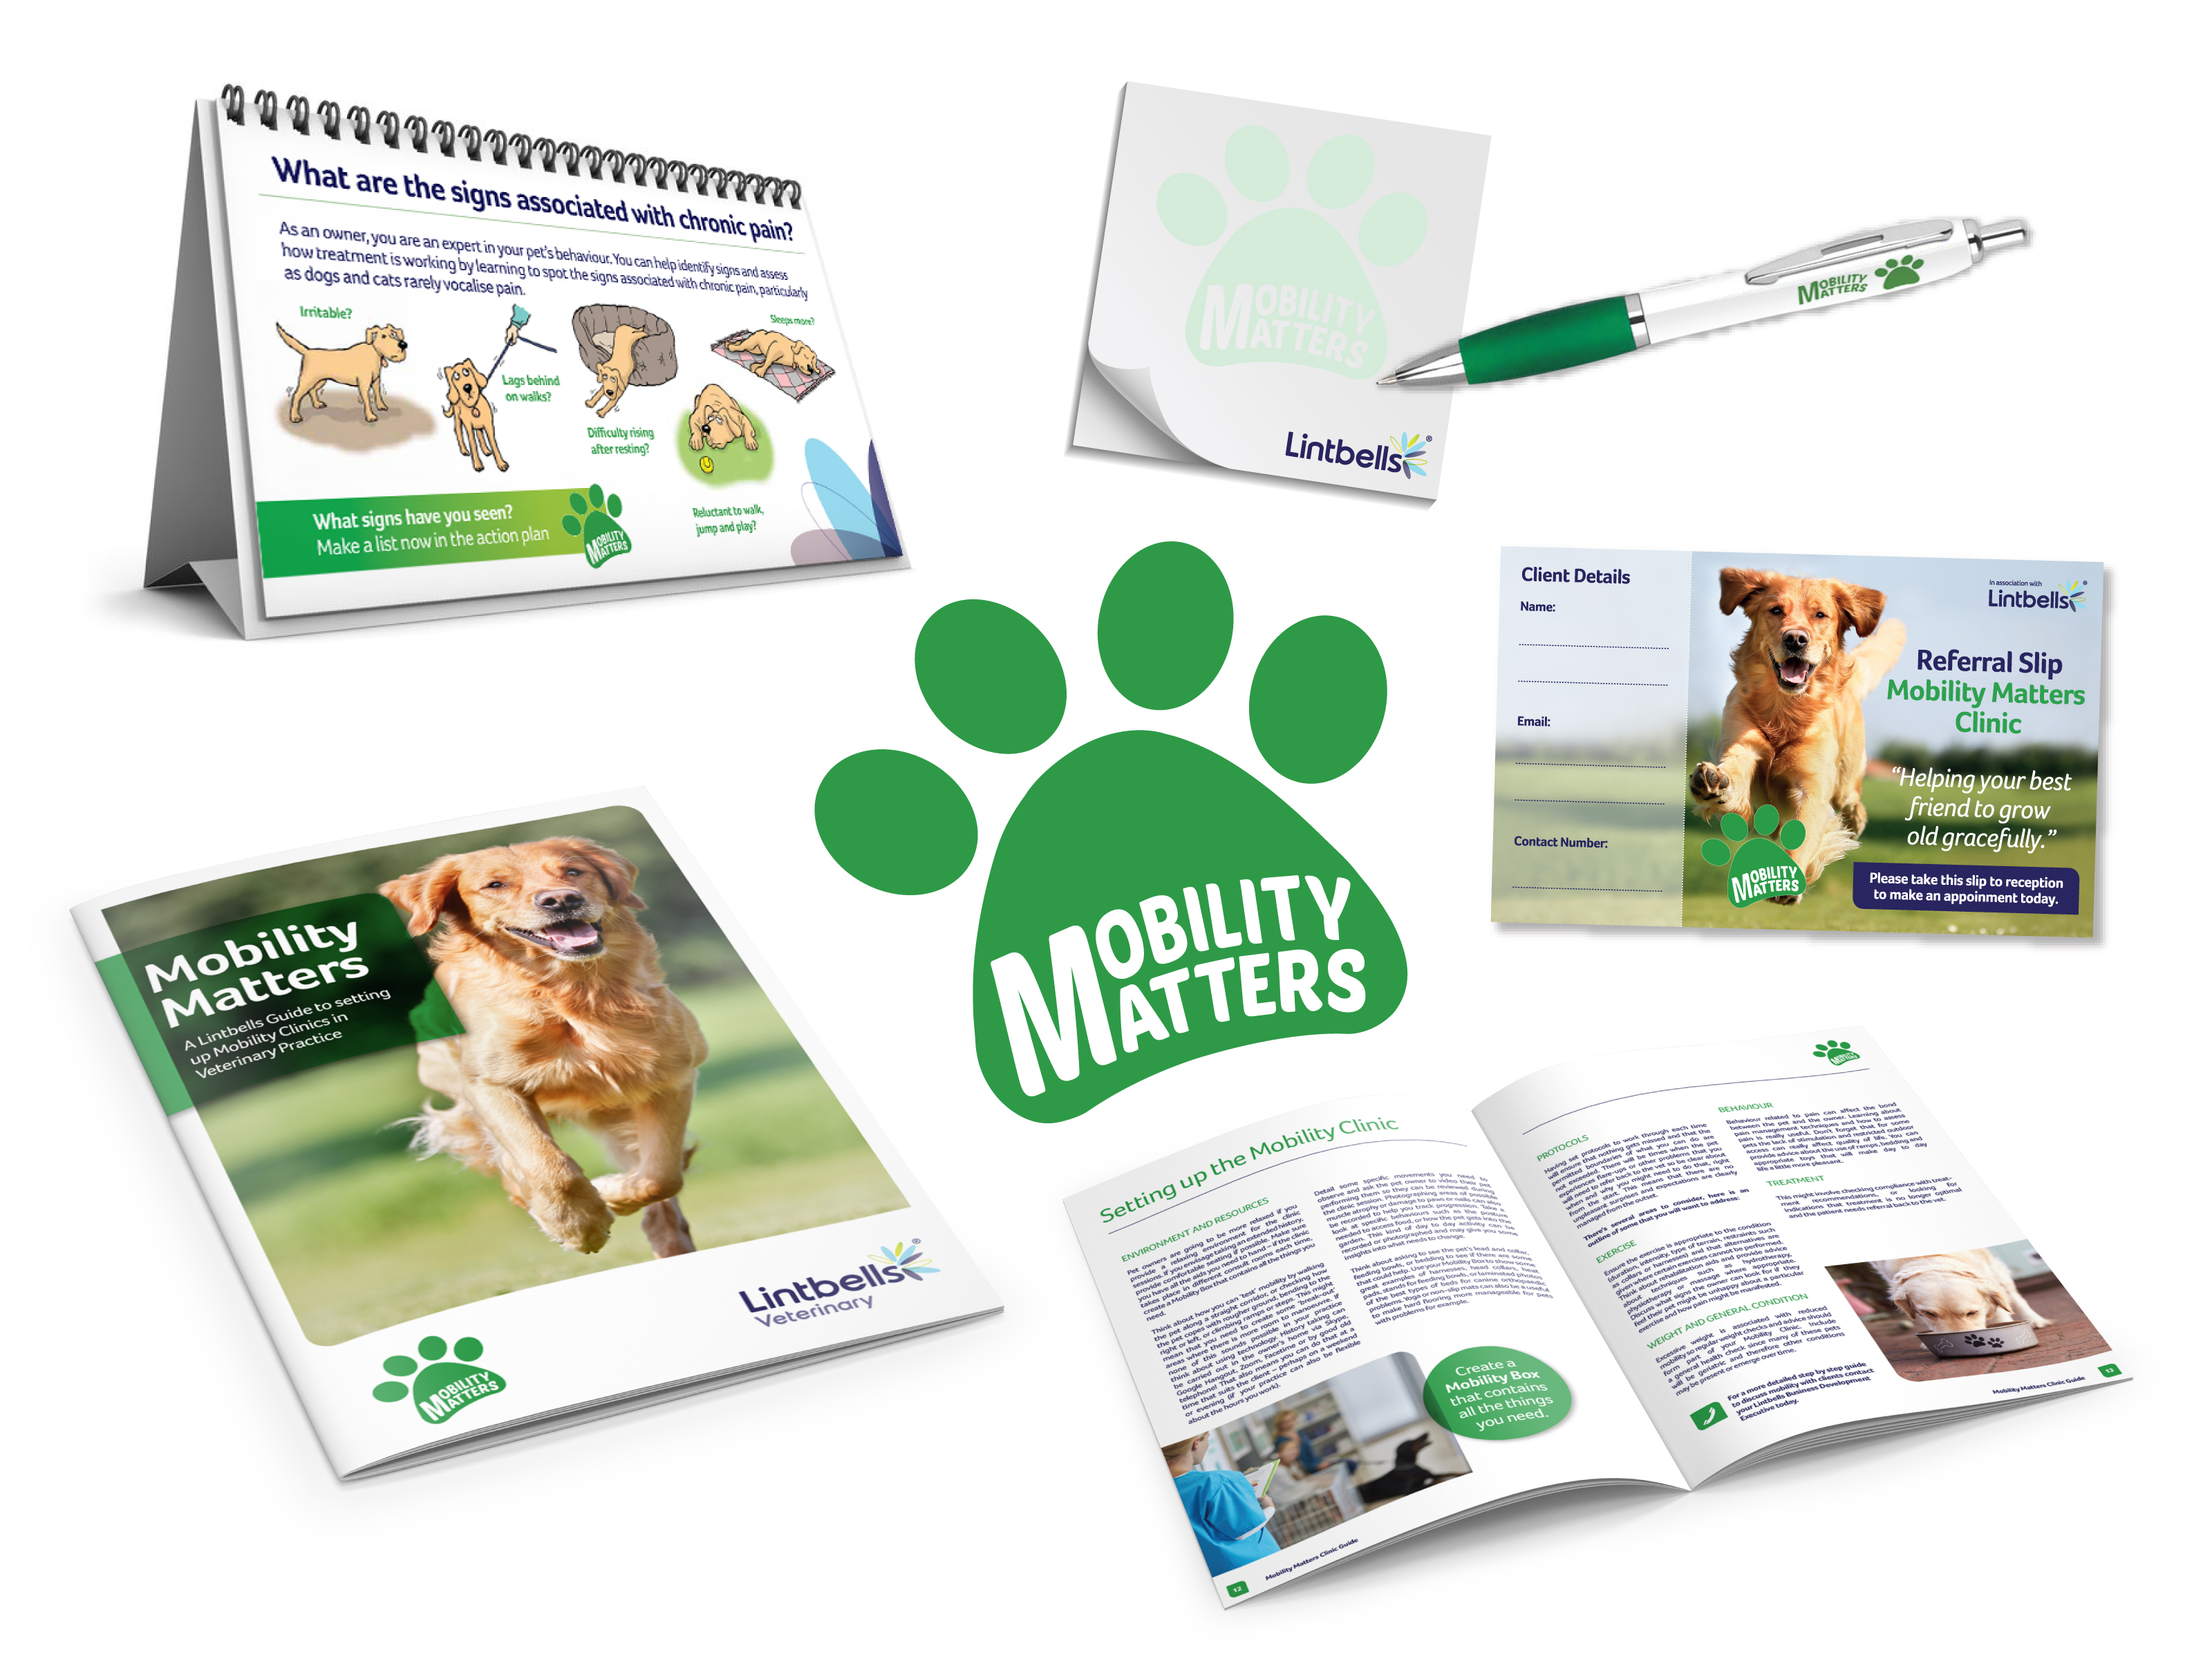 Lintbells says Mobility Matters at London Vet Show